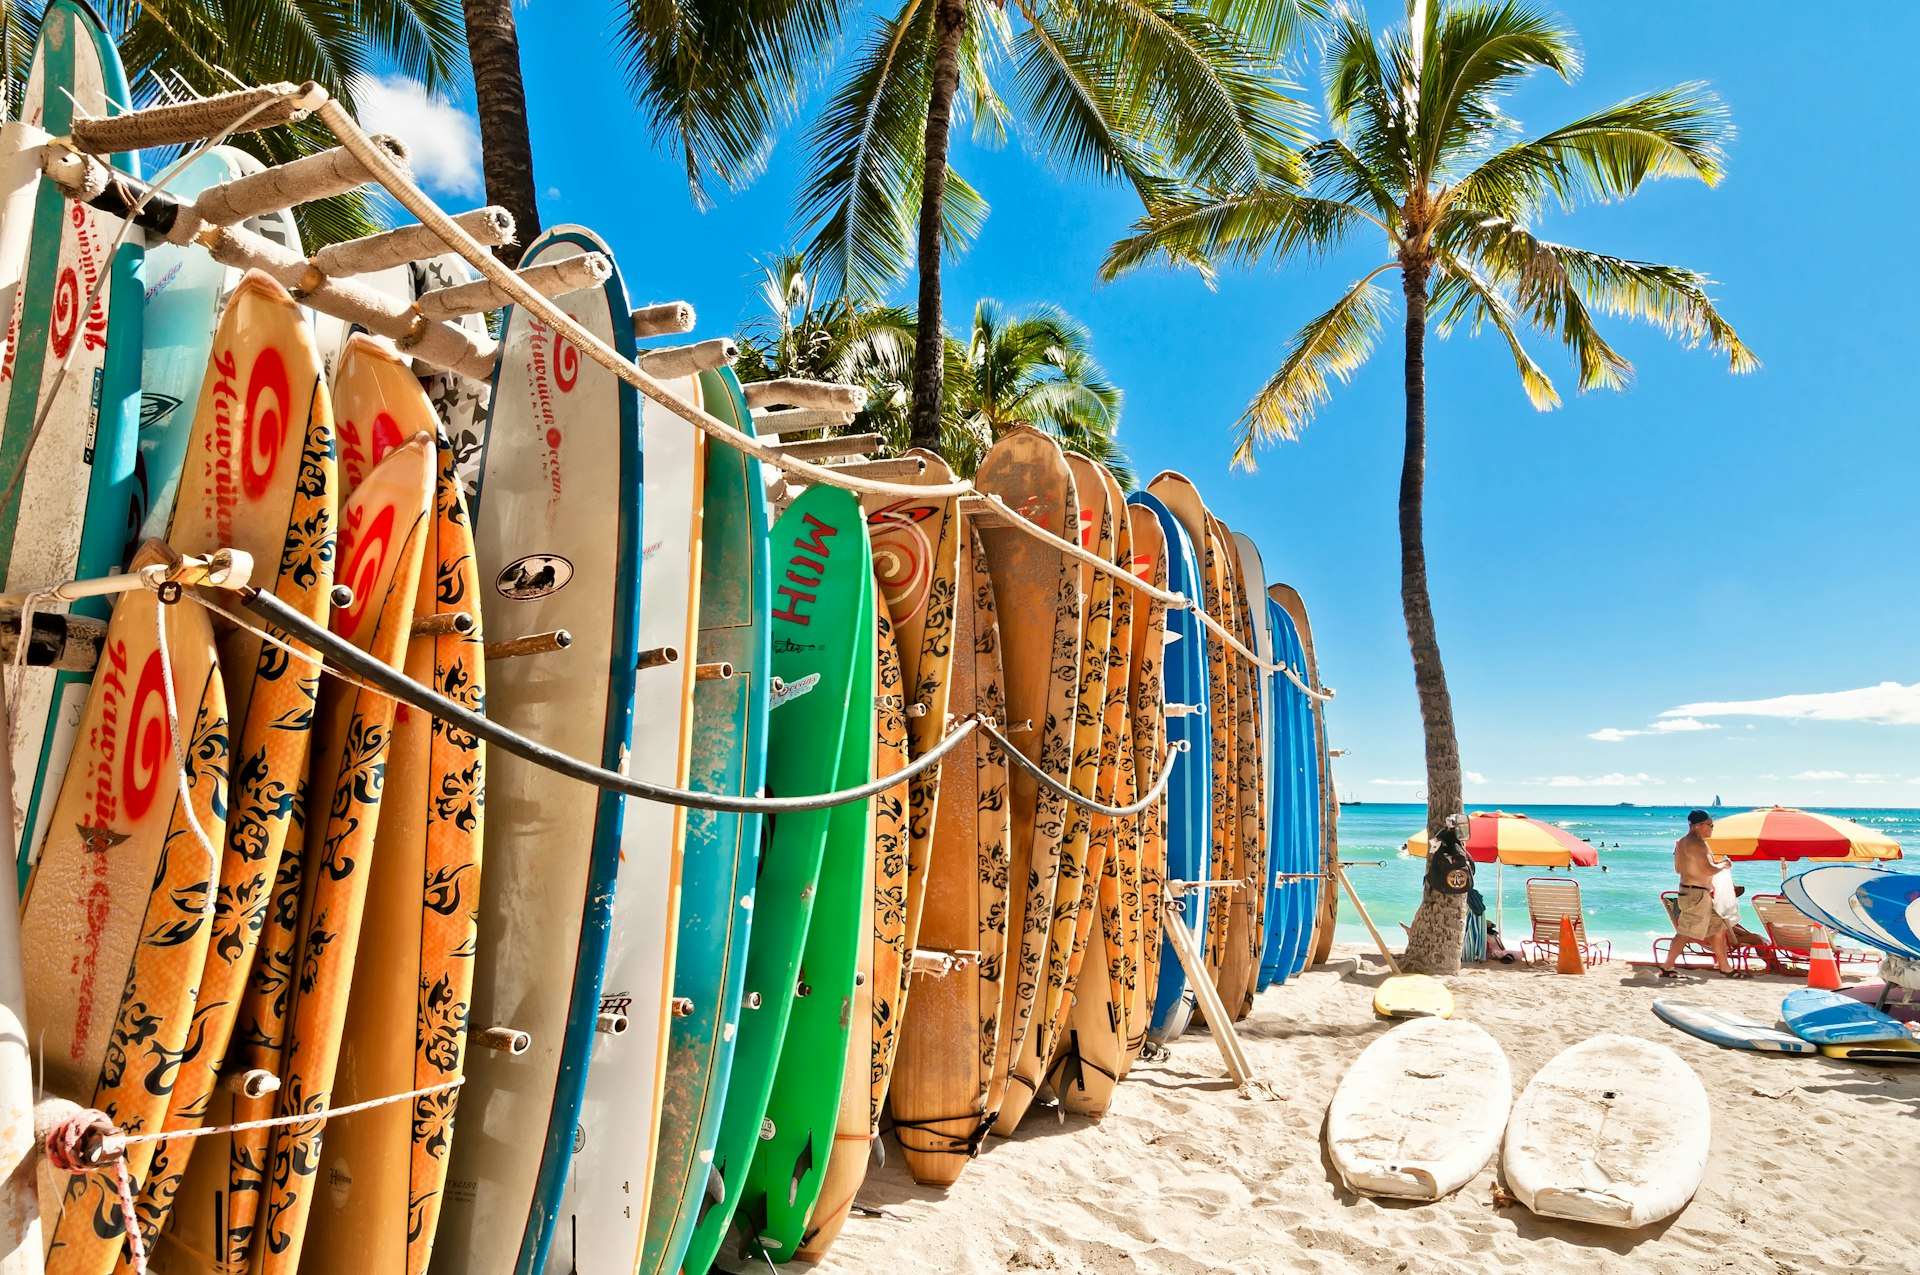 Surfboards lined up in the rack at famous Waikiki Beach in Honolulu, Hawaii